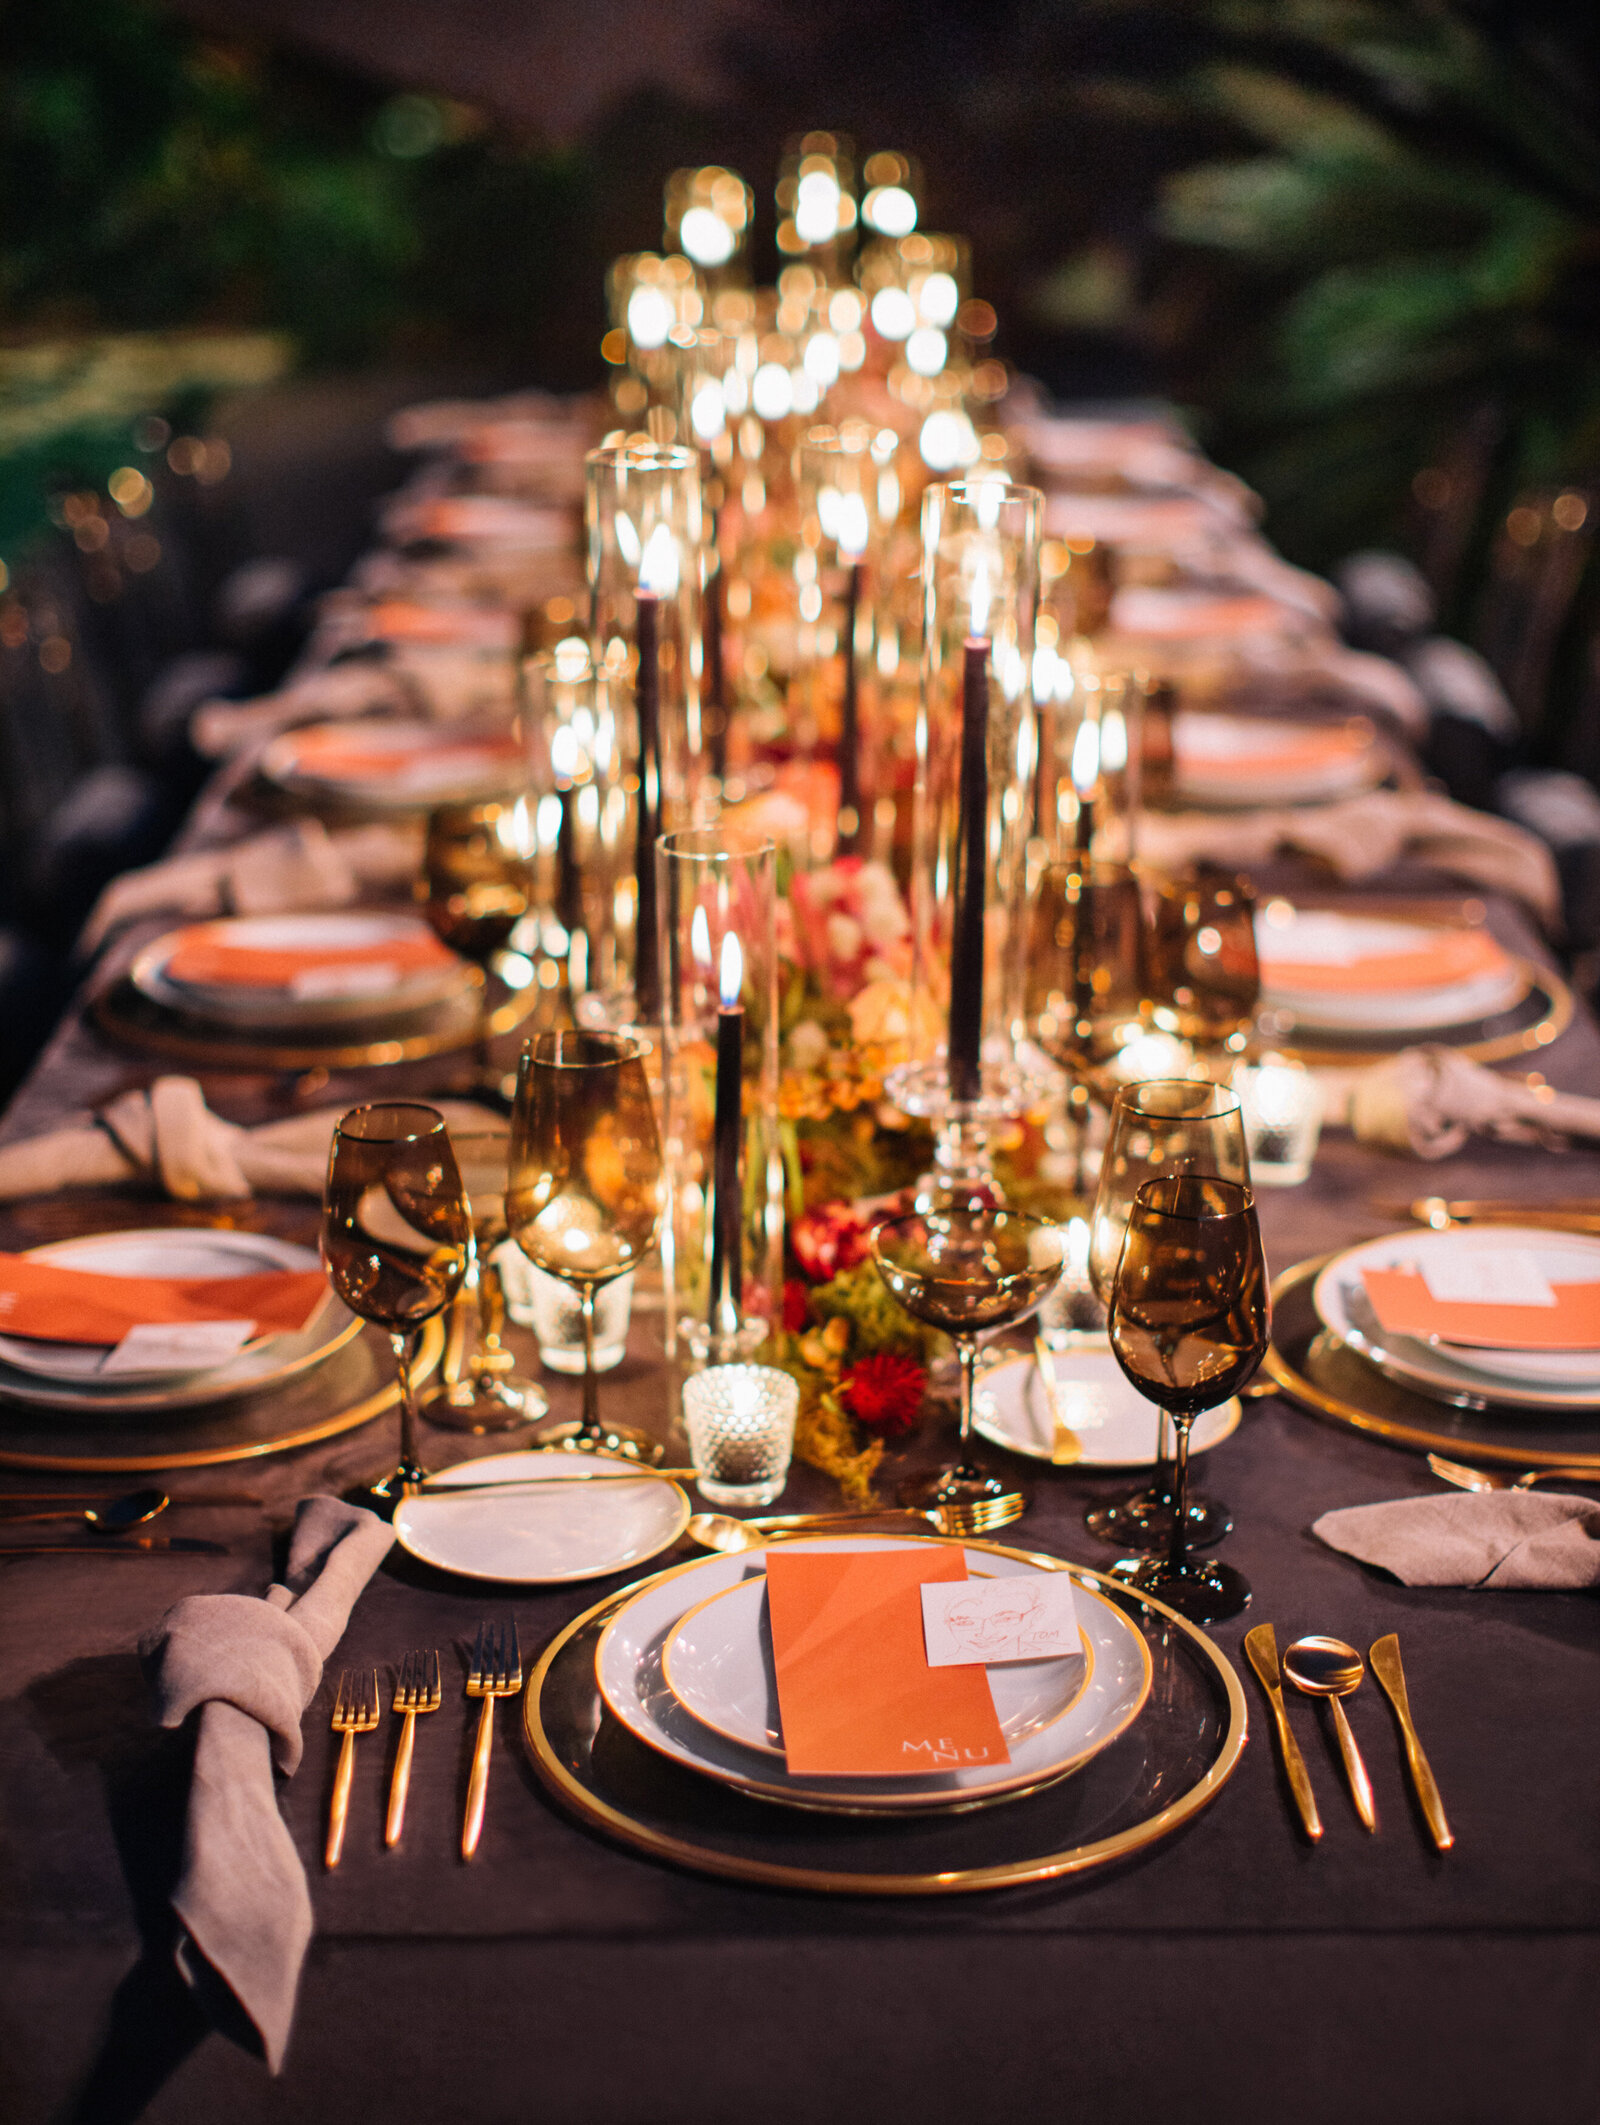 070-For-the-Love-of-It-Sheats-Goldstein-Wedding-Reception-Tablescape-Hovik